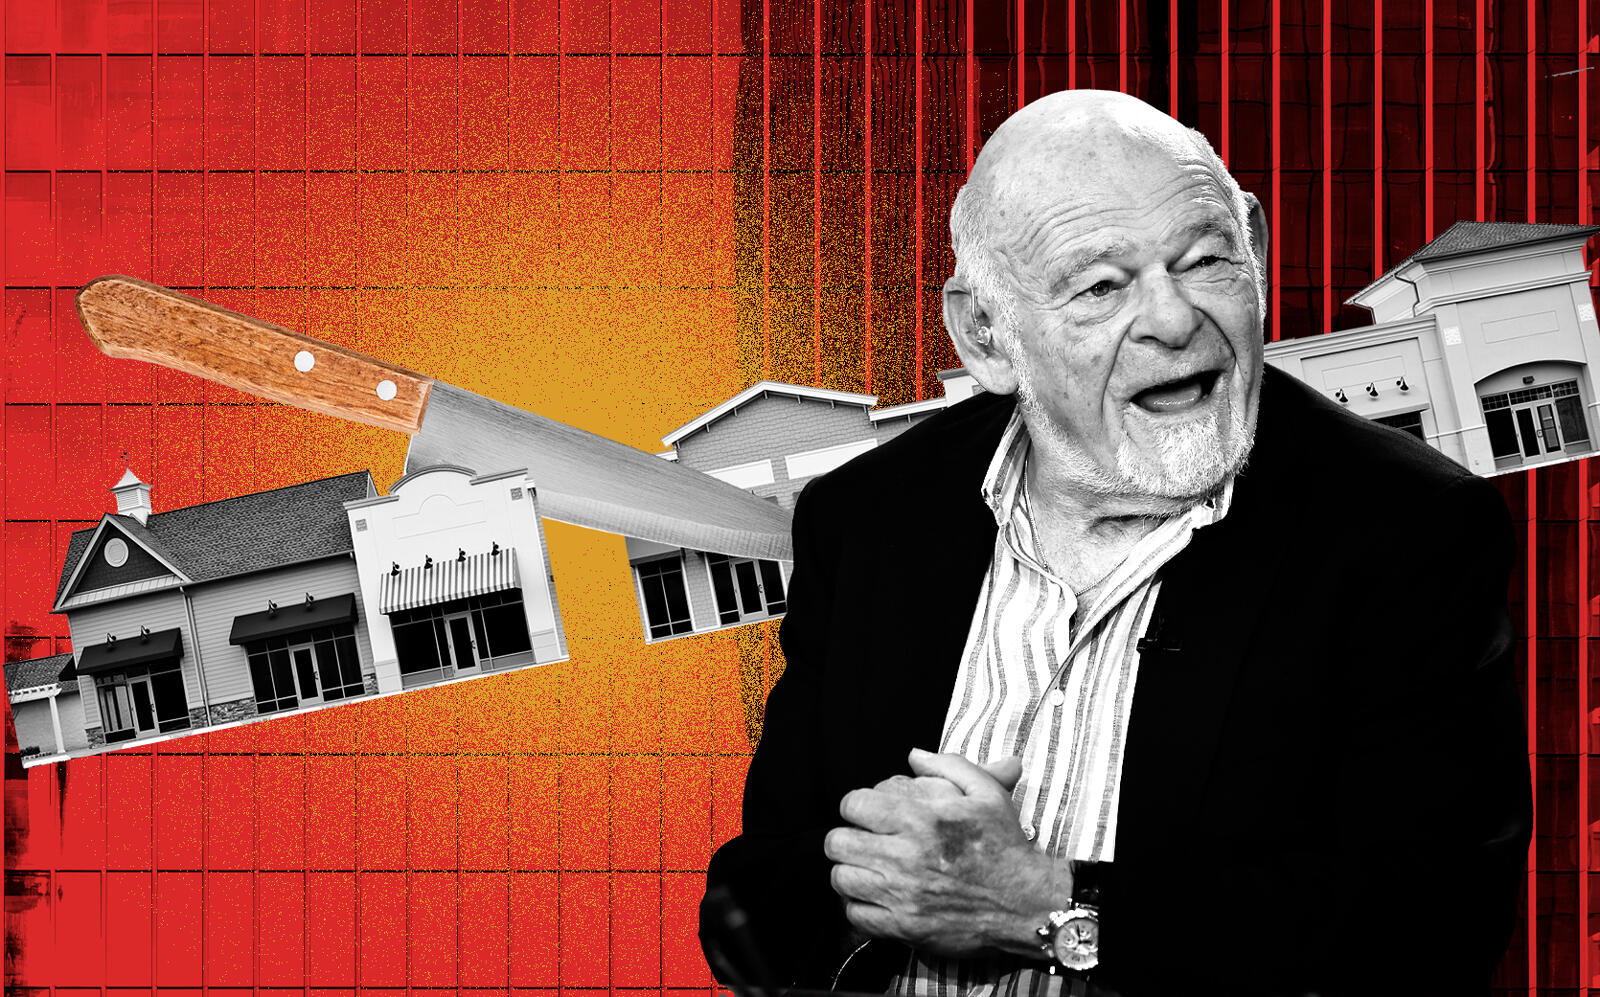 Equity Group Investments chairman Sam Zell (Getty, iStock)